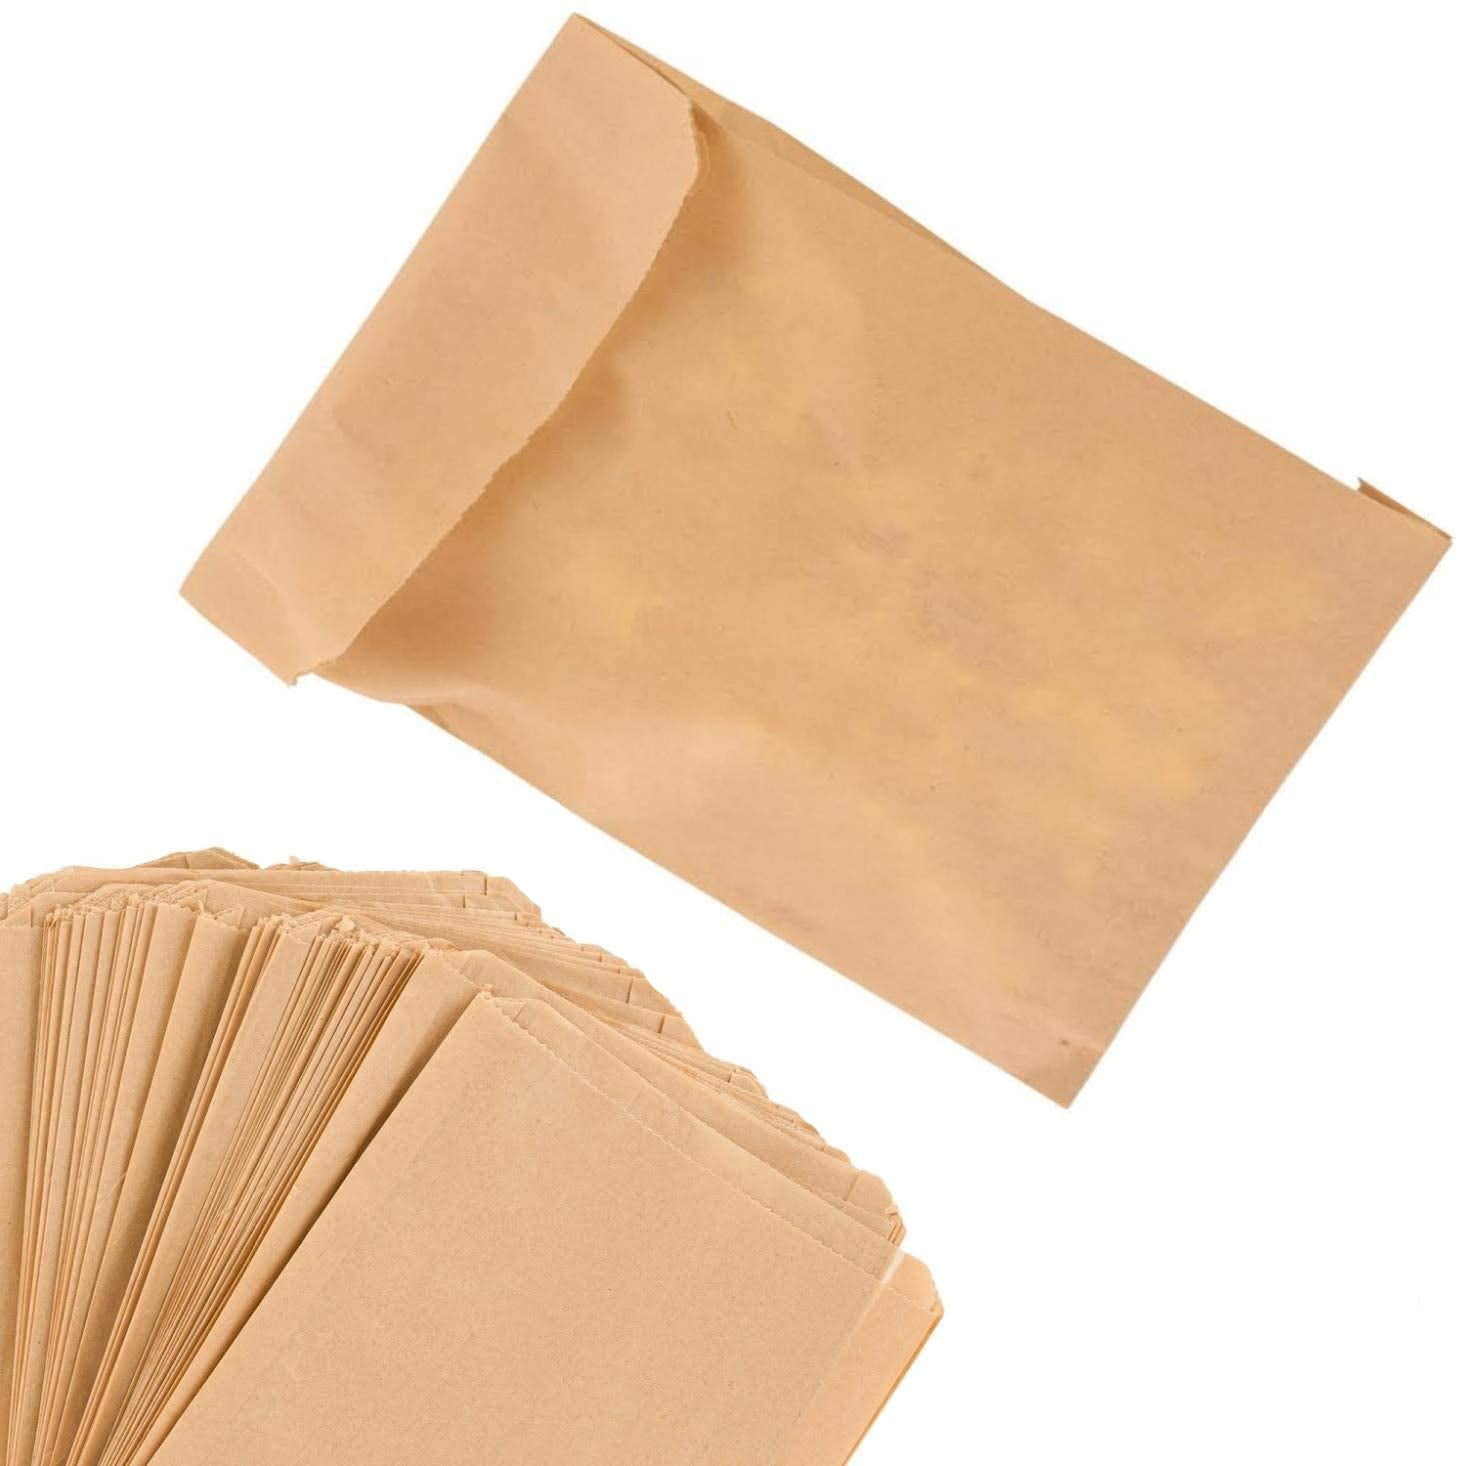 PAPER FOOD BAGS WITH CELLOPHANE BROWN KRAFT BREAD SANDWICH BAKERY LUNCH PACKING 